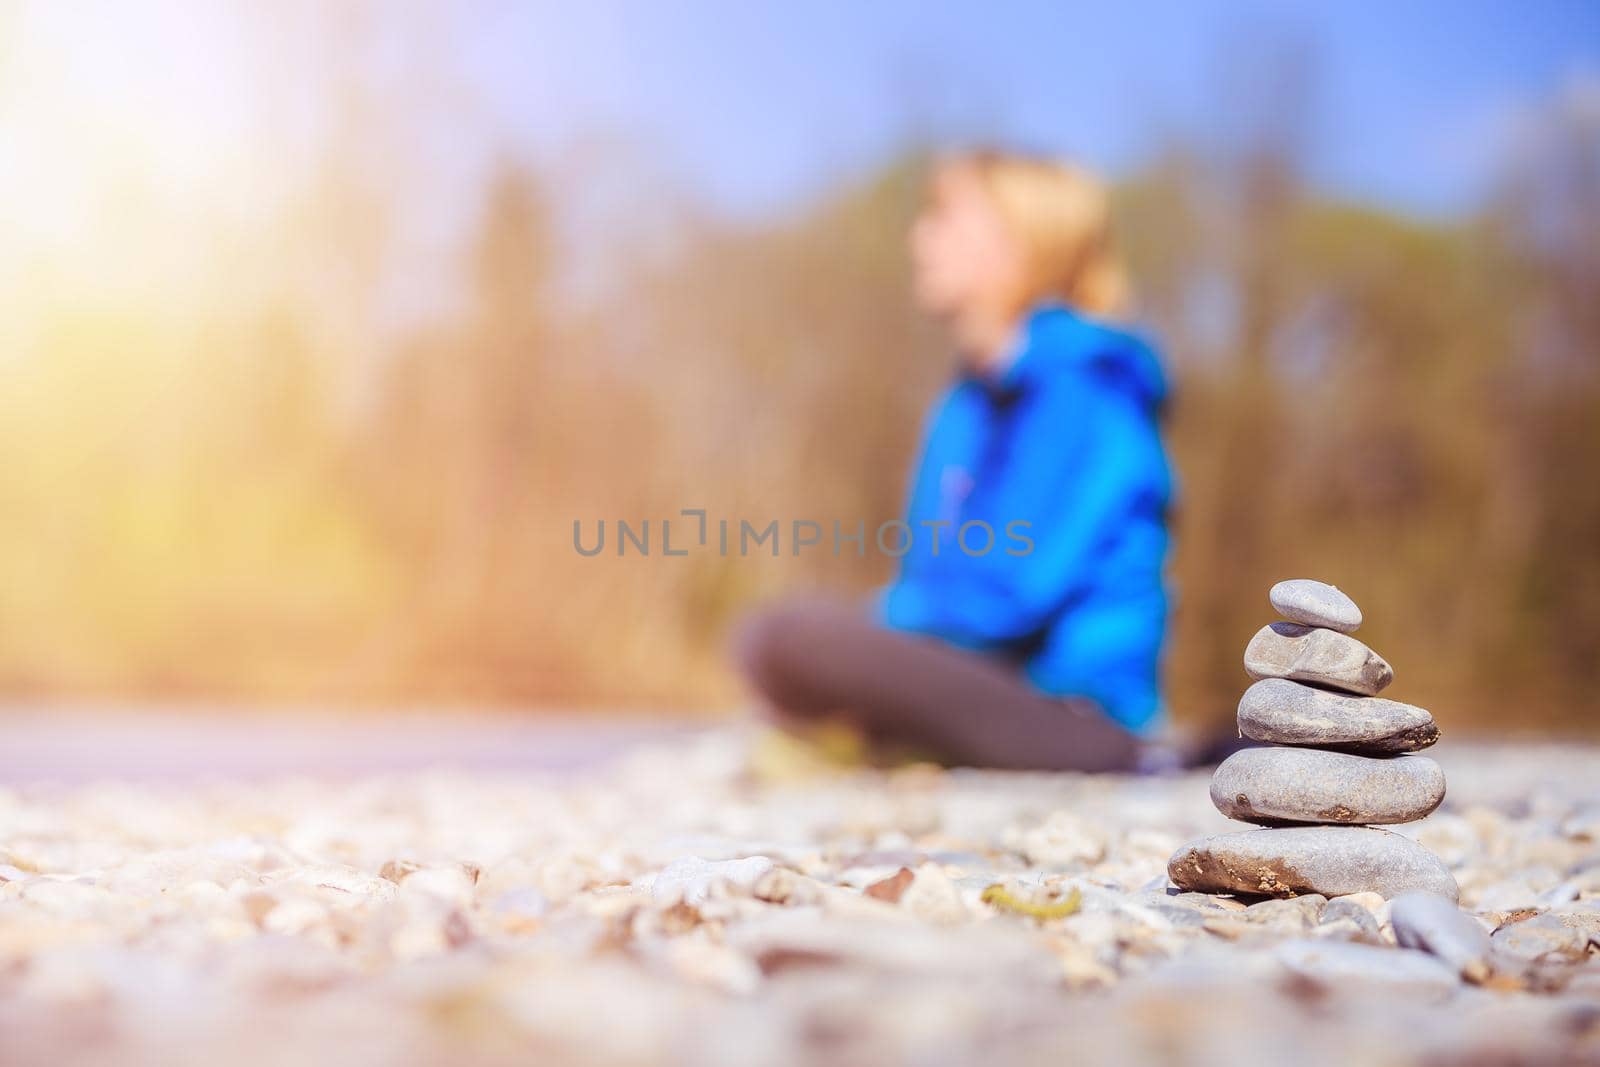 Meditation and relaxation: Cairn in the foreground, meditating woman in the blurry background. Enjoying the morning sun. by Daxenbichler